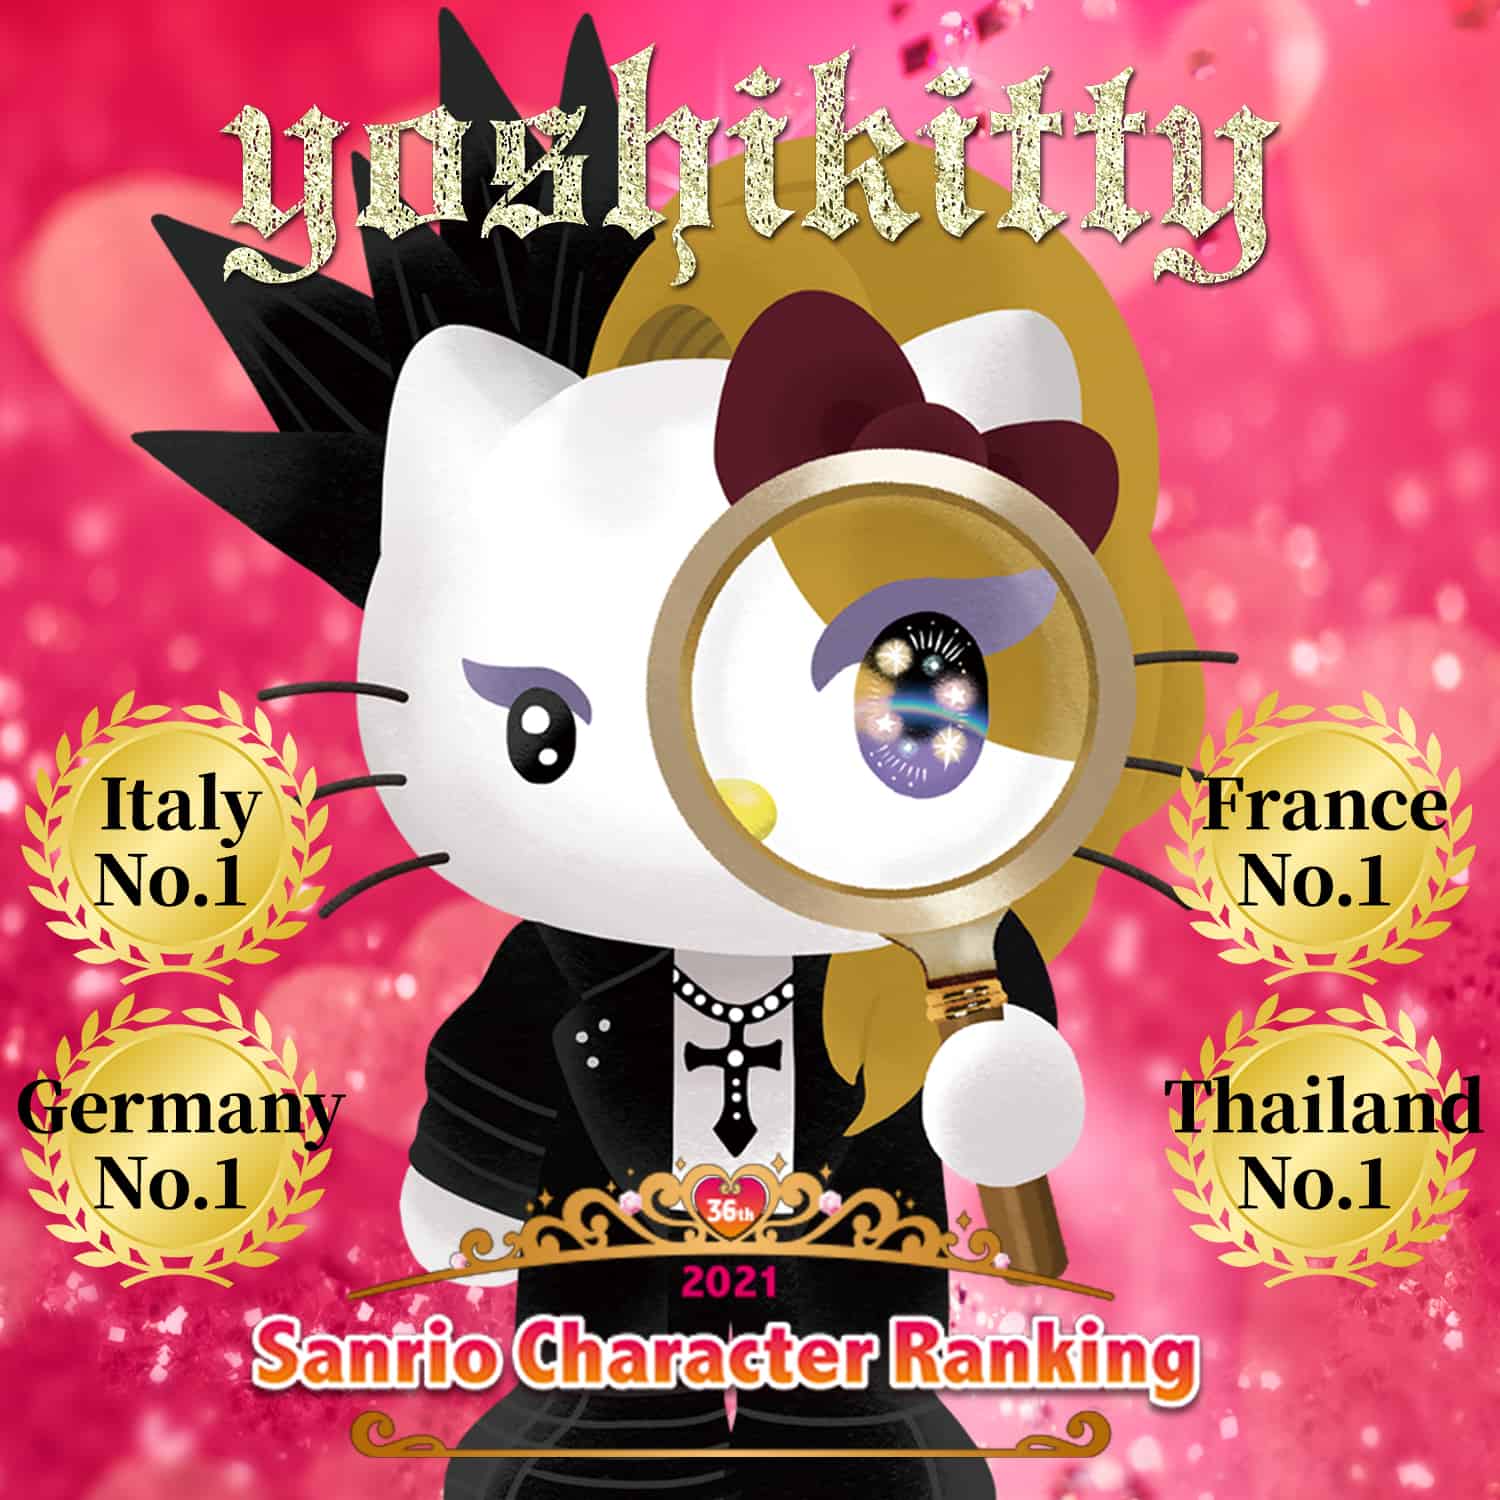 Hello Kitty Returns to the Top of Sanrio Character Ranking